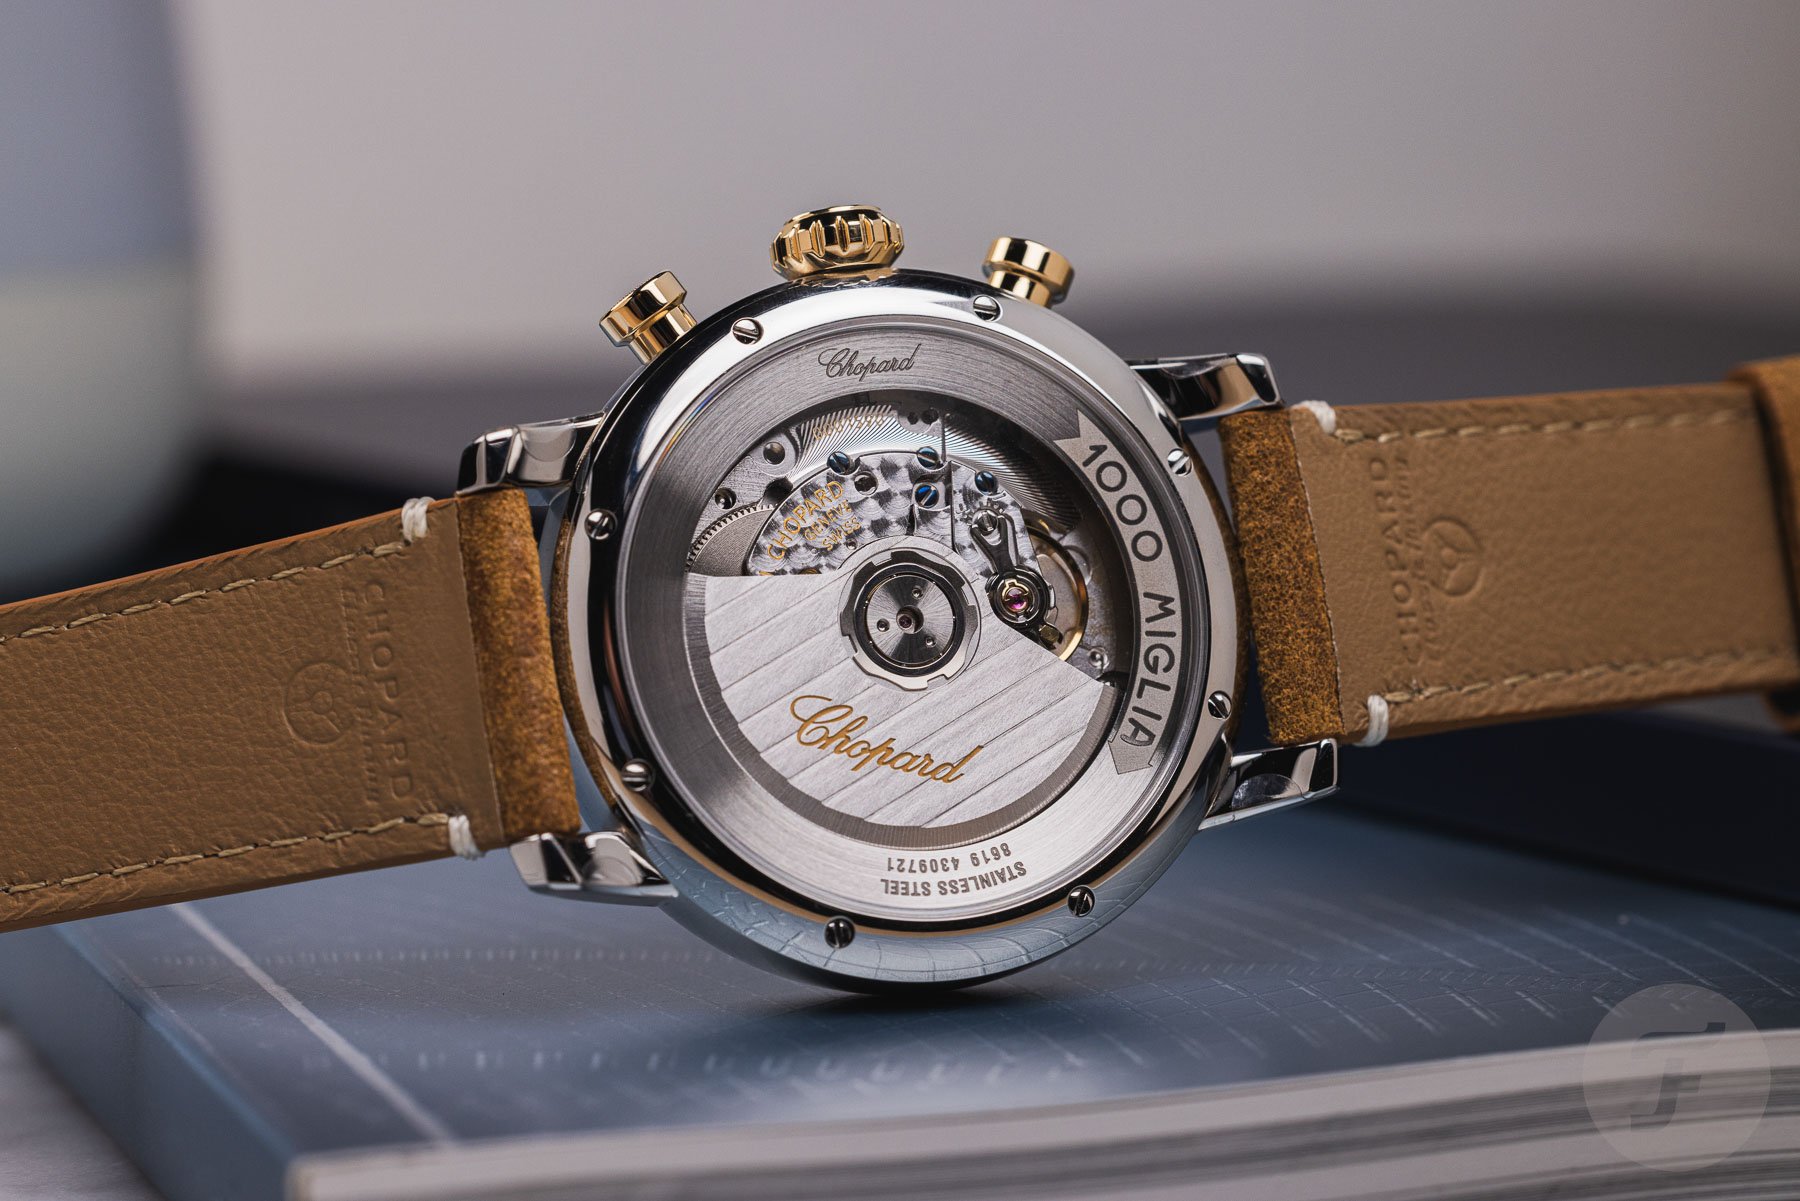 Introducing - Chopard Mille Miglia Bamford Edition (Specs & Price)